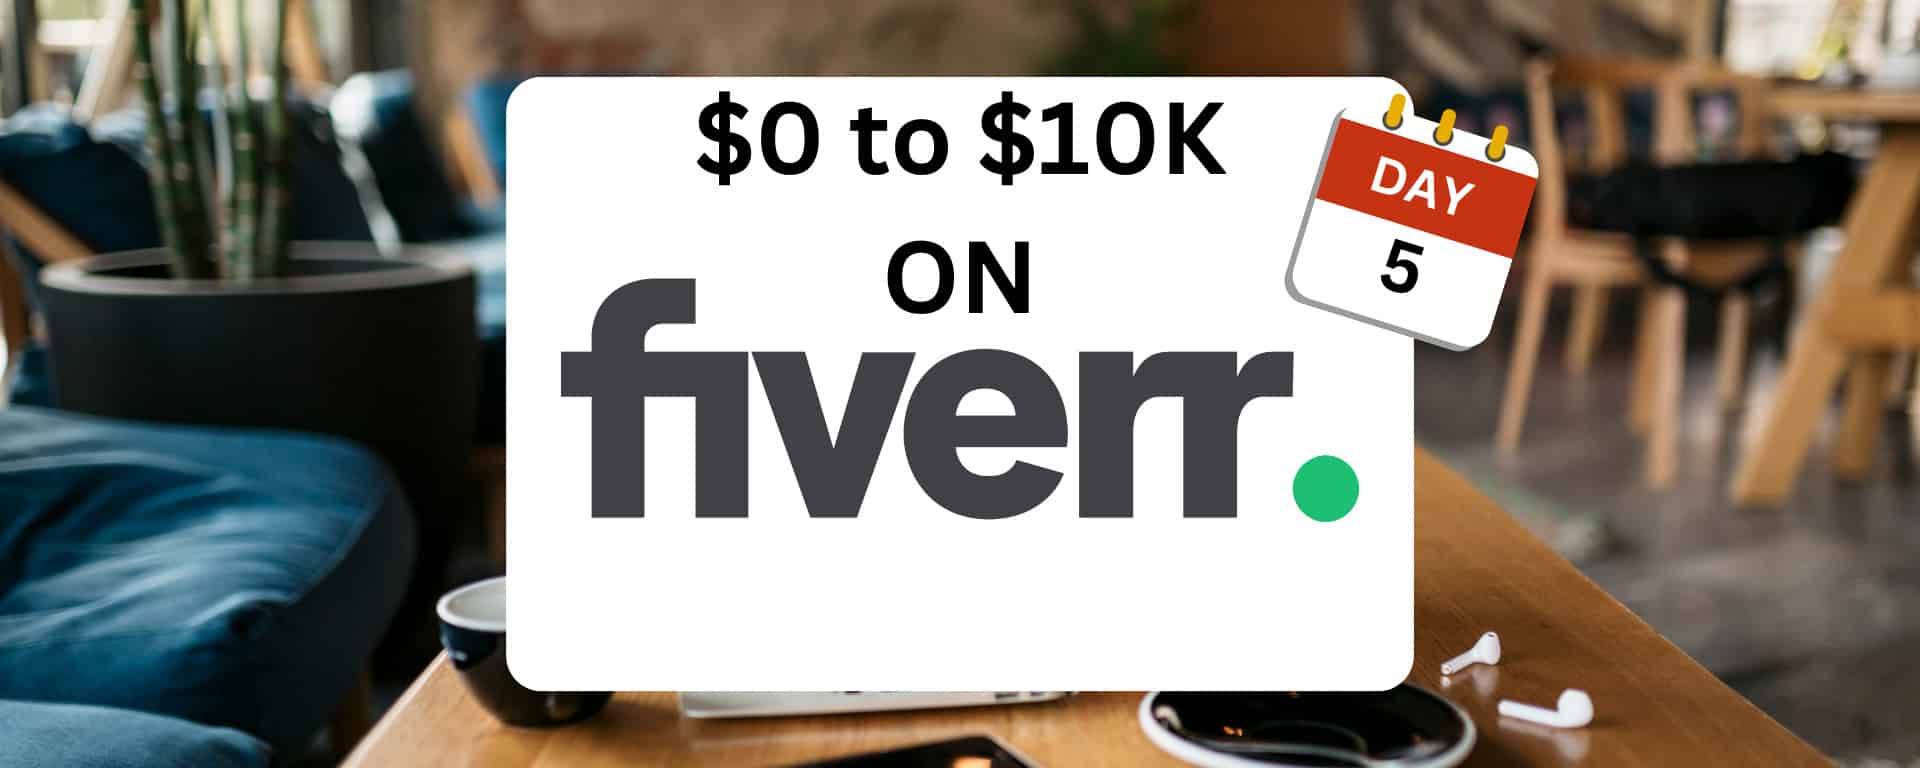 $0 to $10K on Fiverr - Day 5